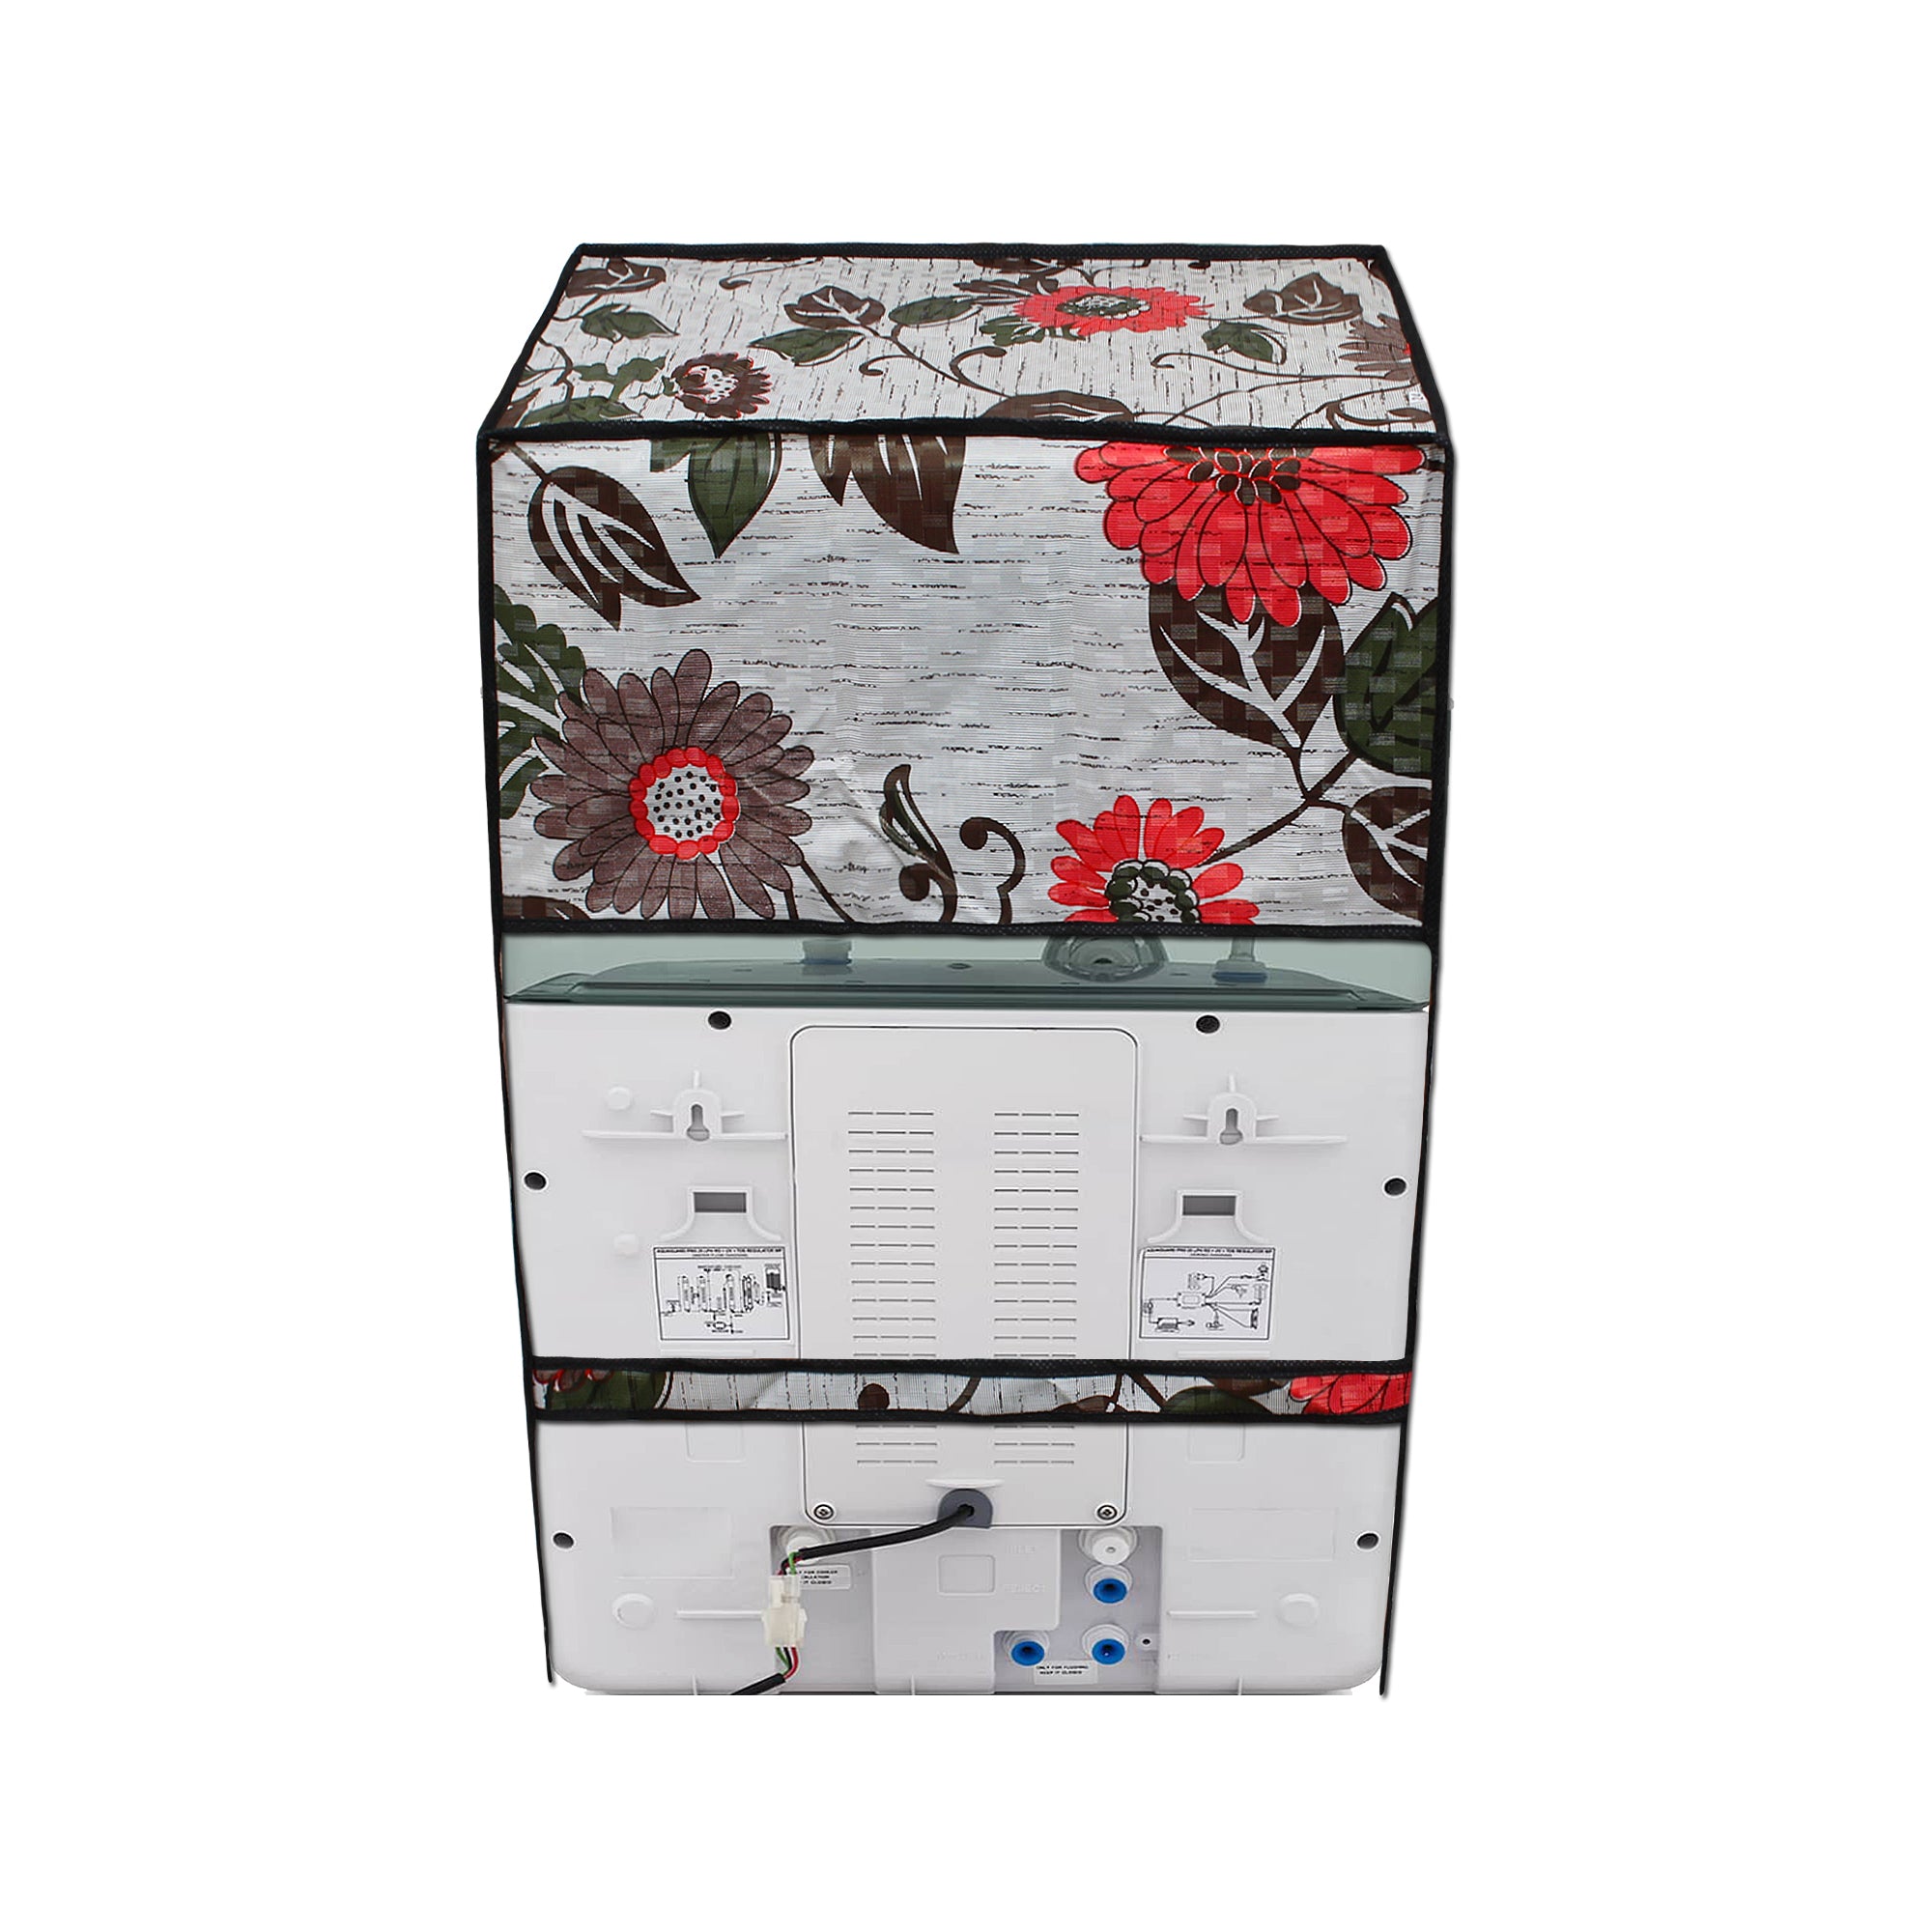 Waterproof & Dustproof Water Purifier RO Cover, SA21 - Dream Care Furnishings Private Limited